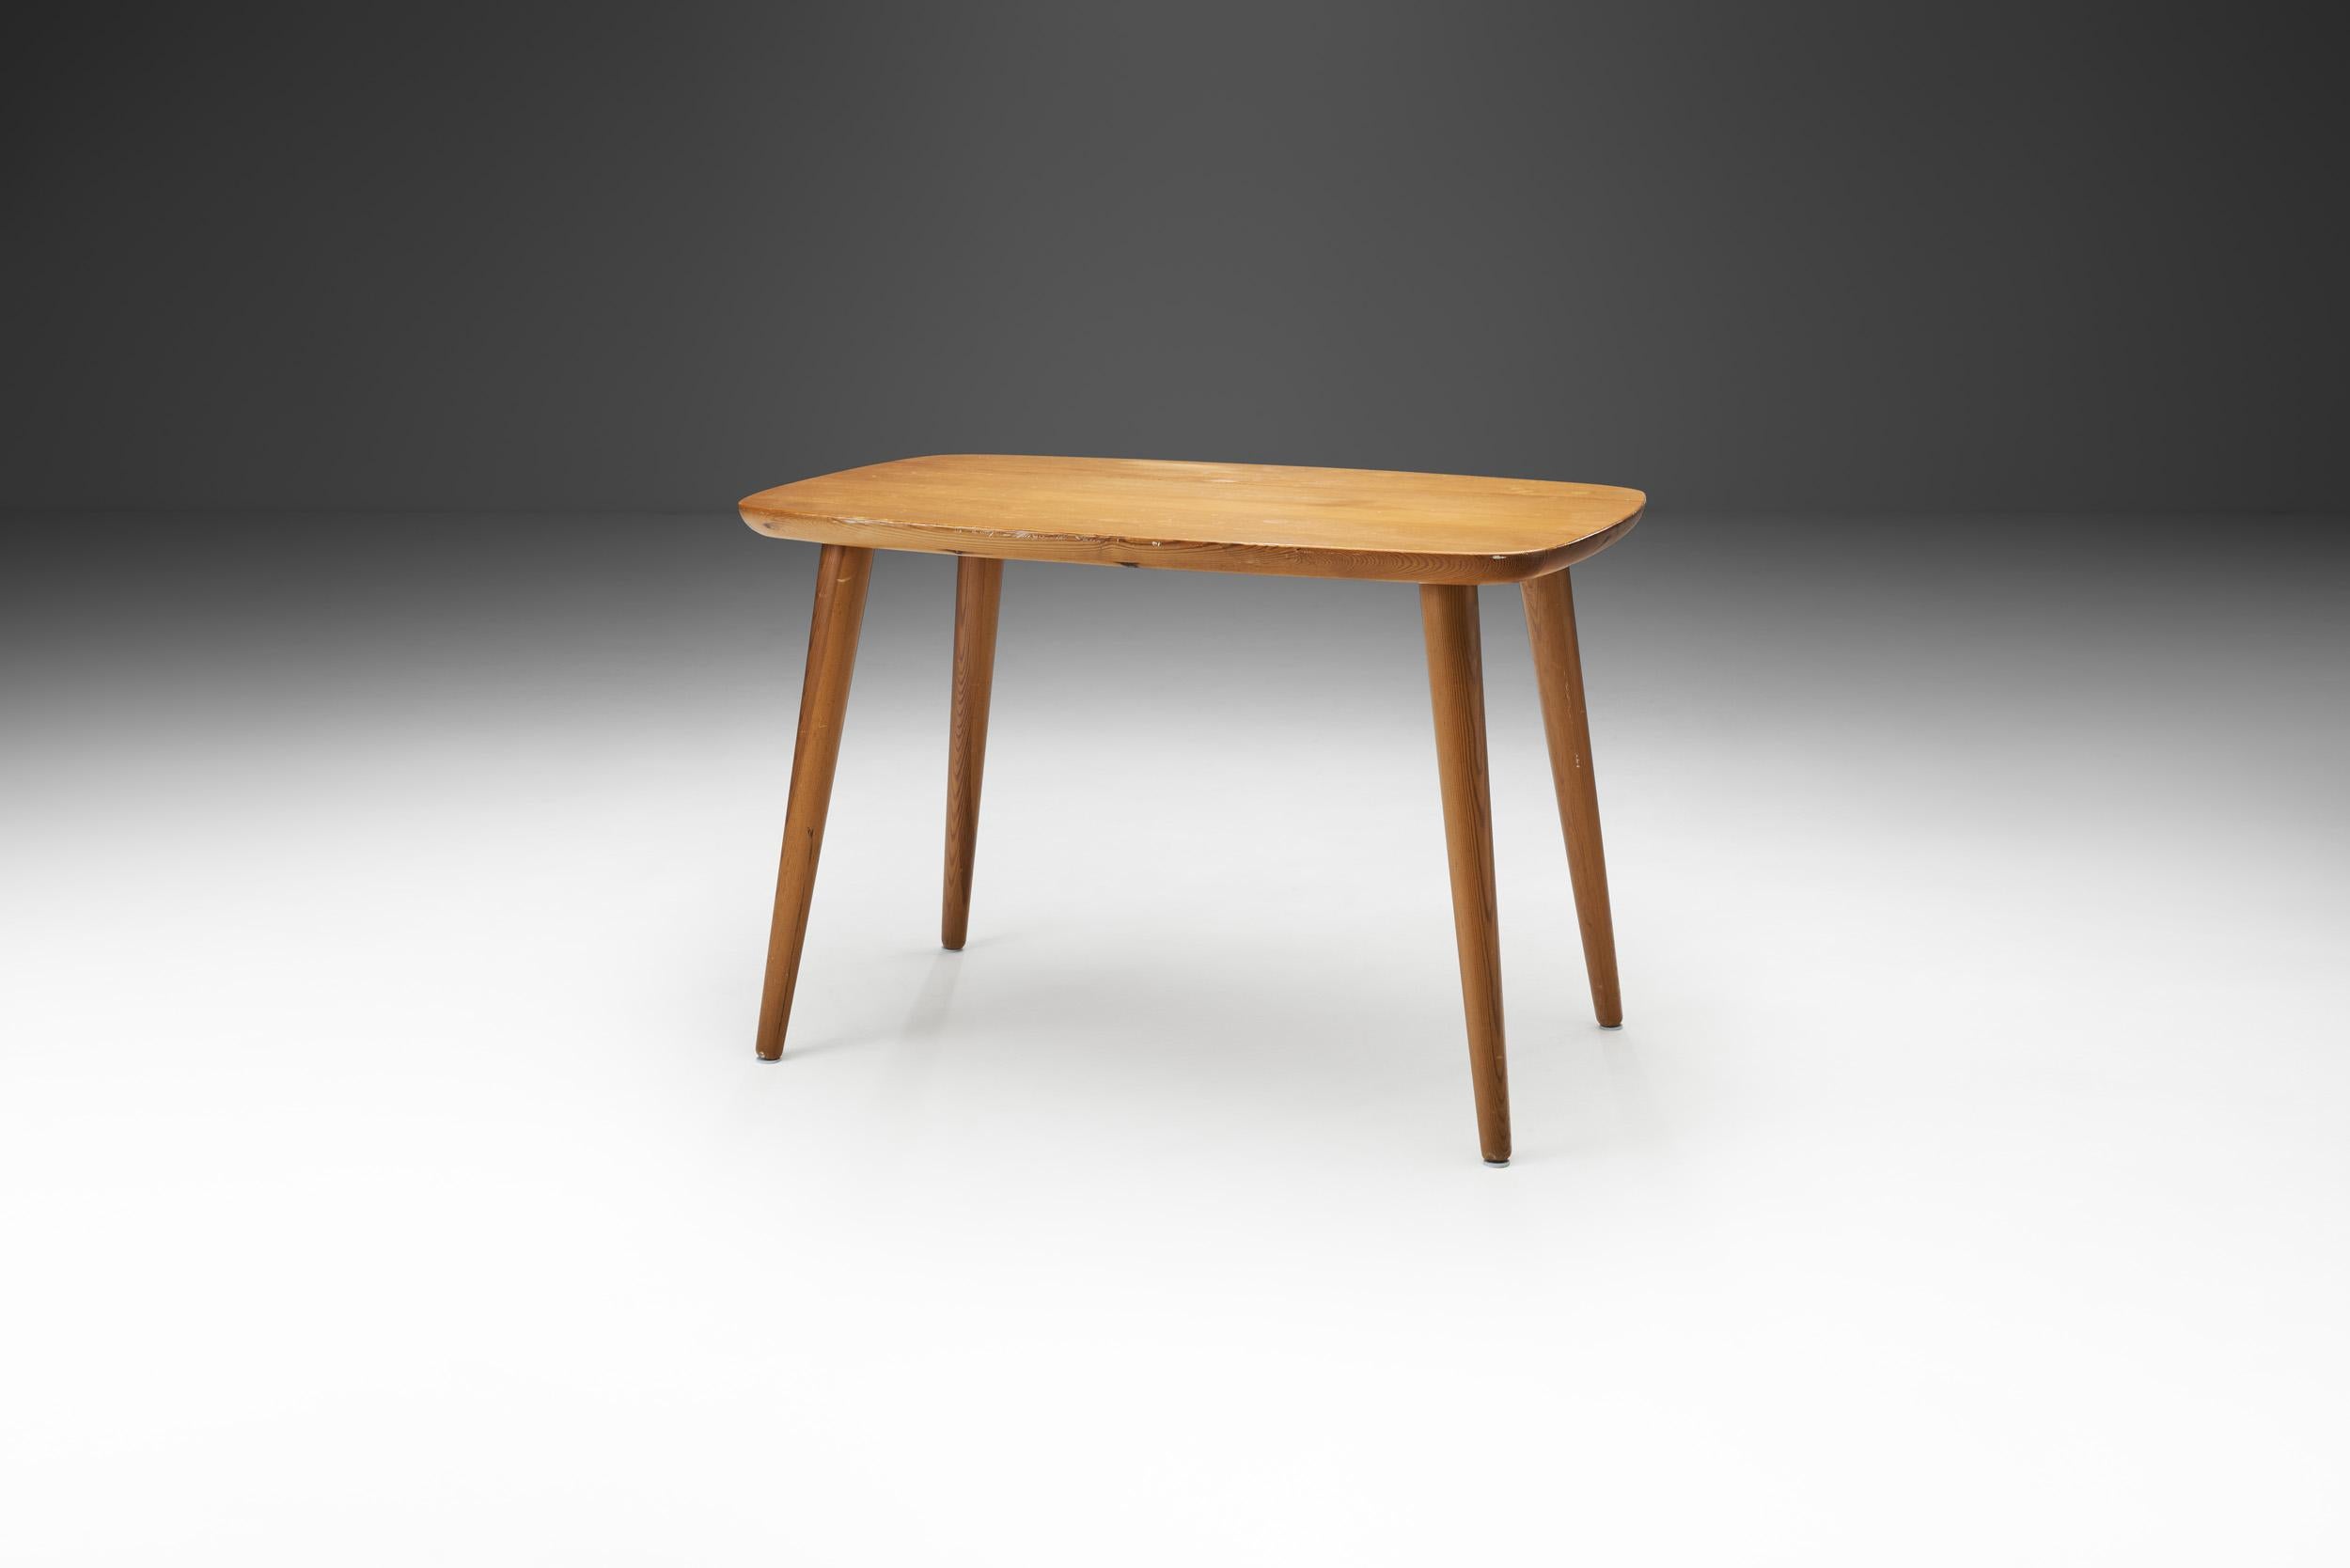 This simple, beautifully designed and executed coffee table shows why this is. This early mid-century modern Göran Malmvall table combines aesthetics with modern functionality in line with Sweden’s design philosophy. Early 20th century Swedish